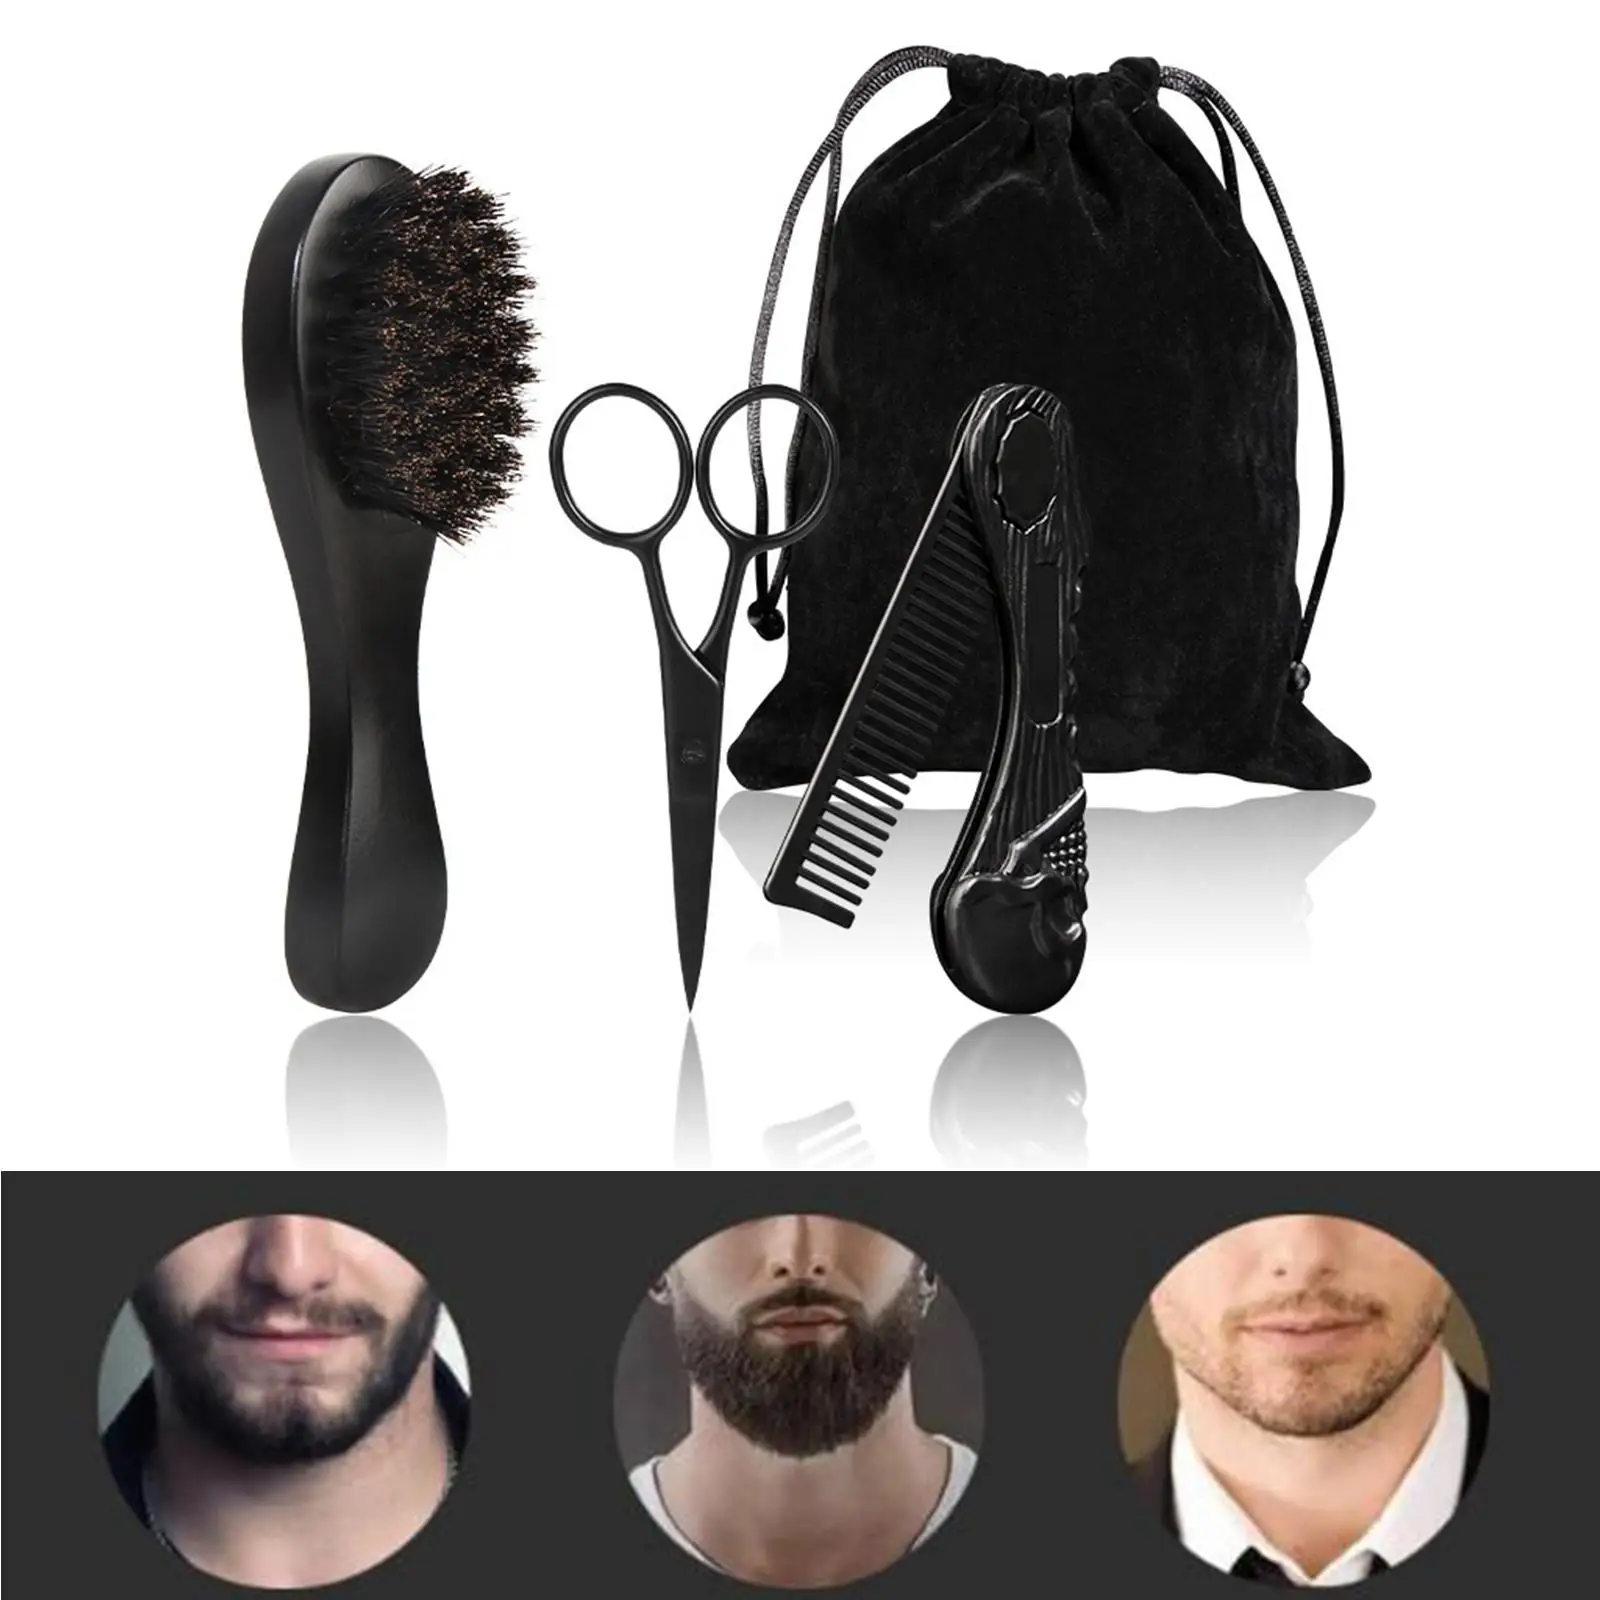 3x Professional Men Beard Care Kit Gift Wooden Comb Brush with Dustproof Bag for Men`s Travel Home Cleaning Grooming Tool